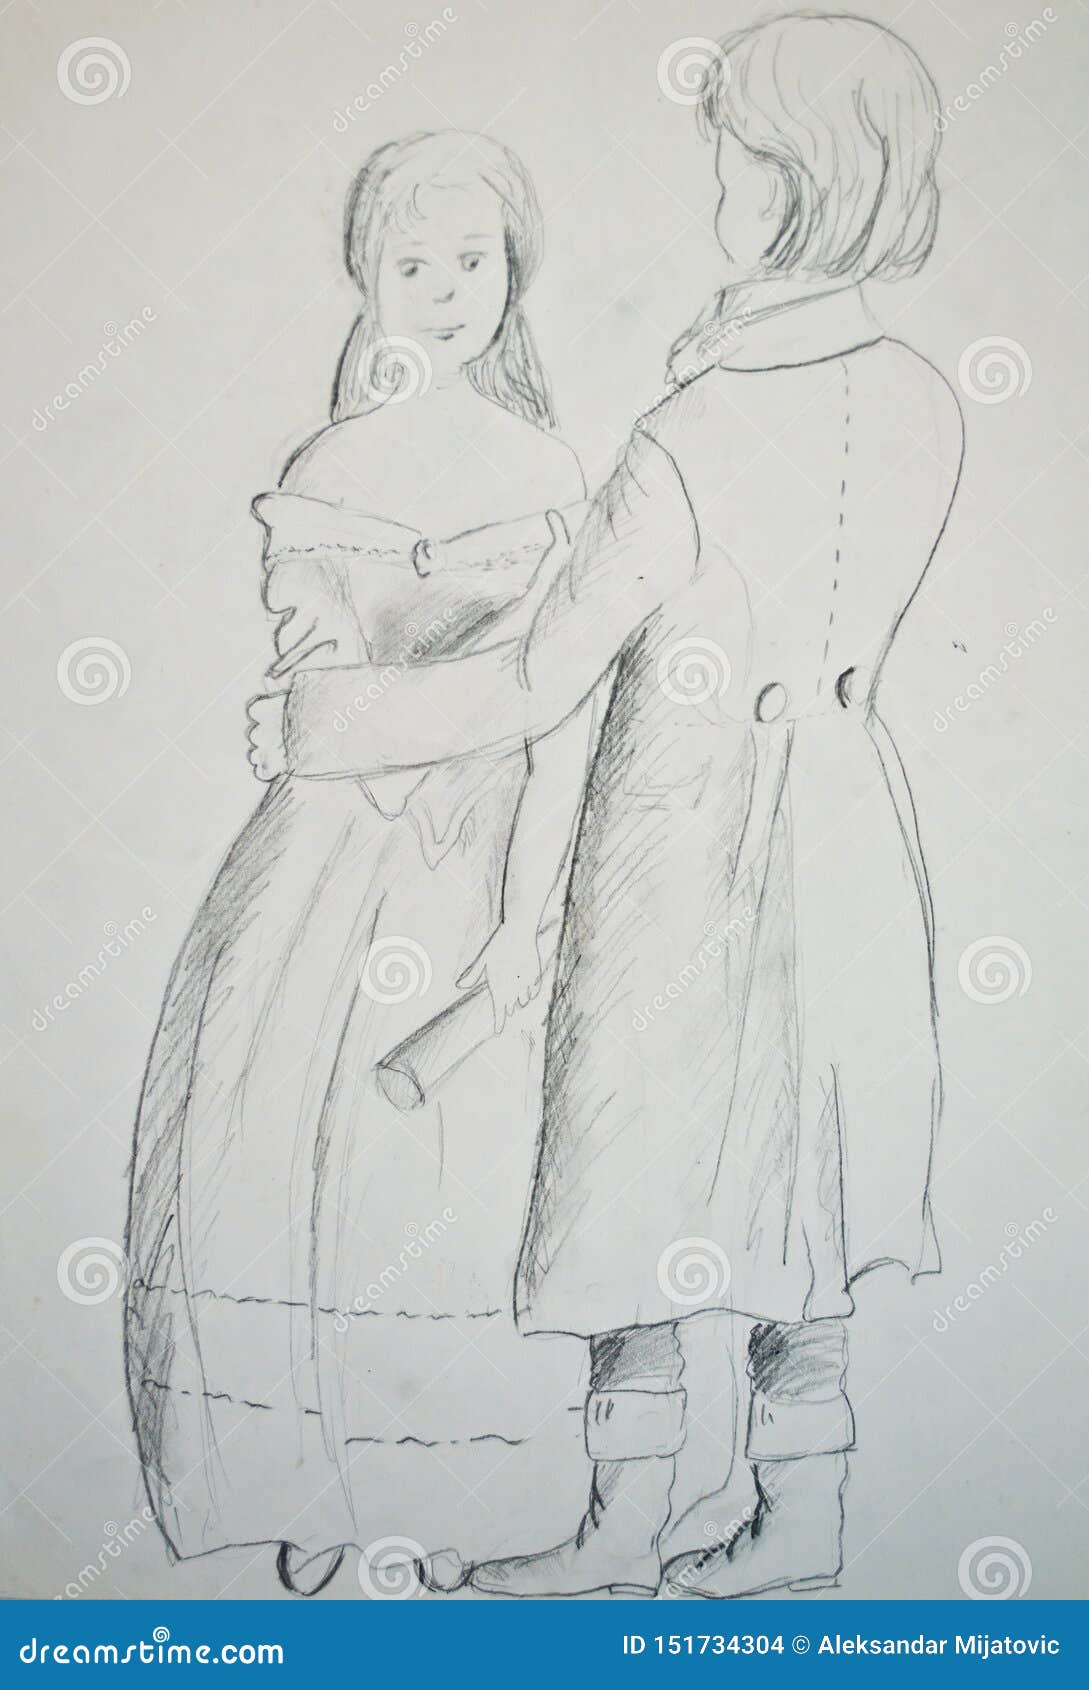 pencil drawing of couple Inside love, couple drawing step by step